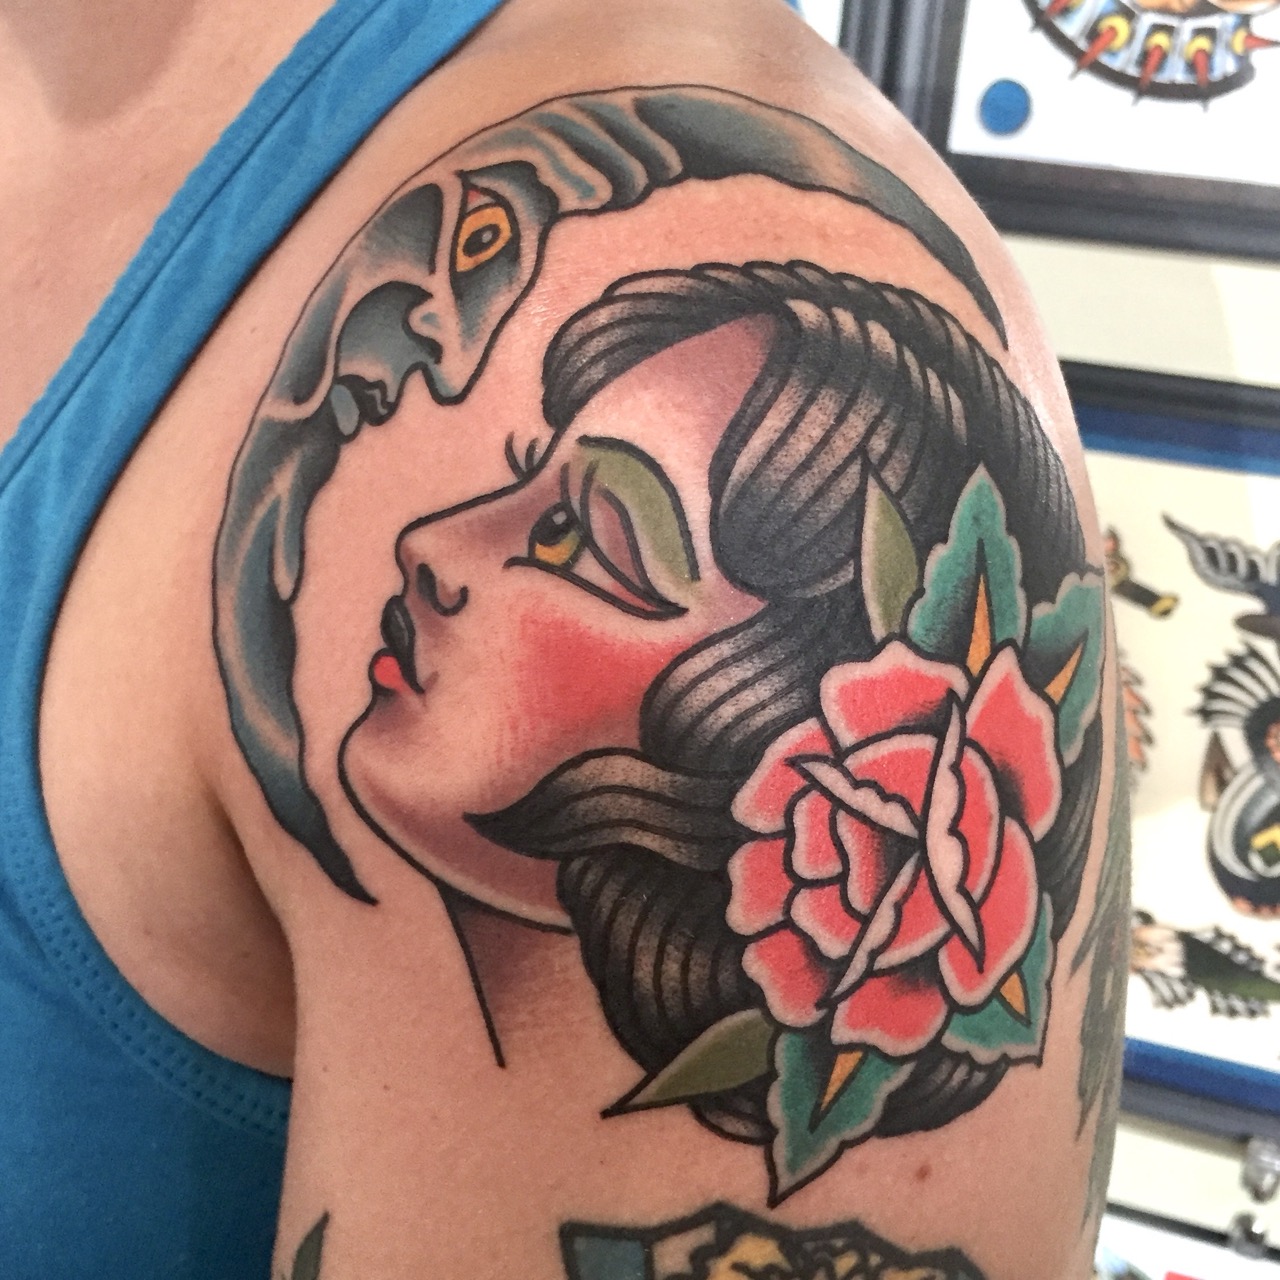 Classic traditional lady head looking at the moon tattoo